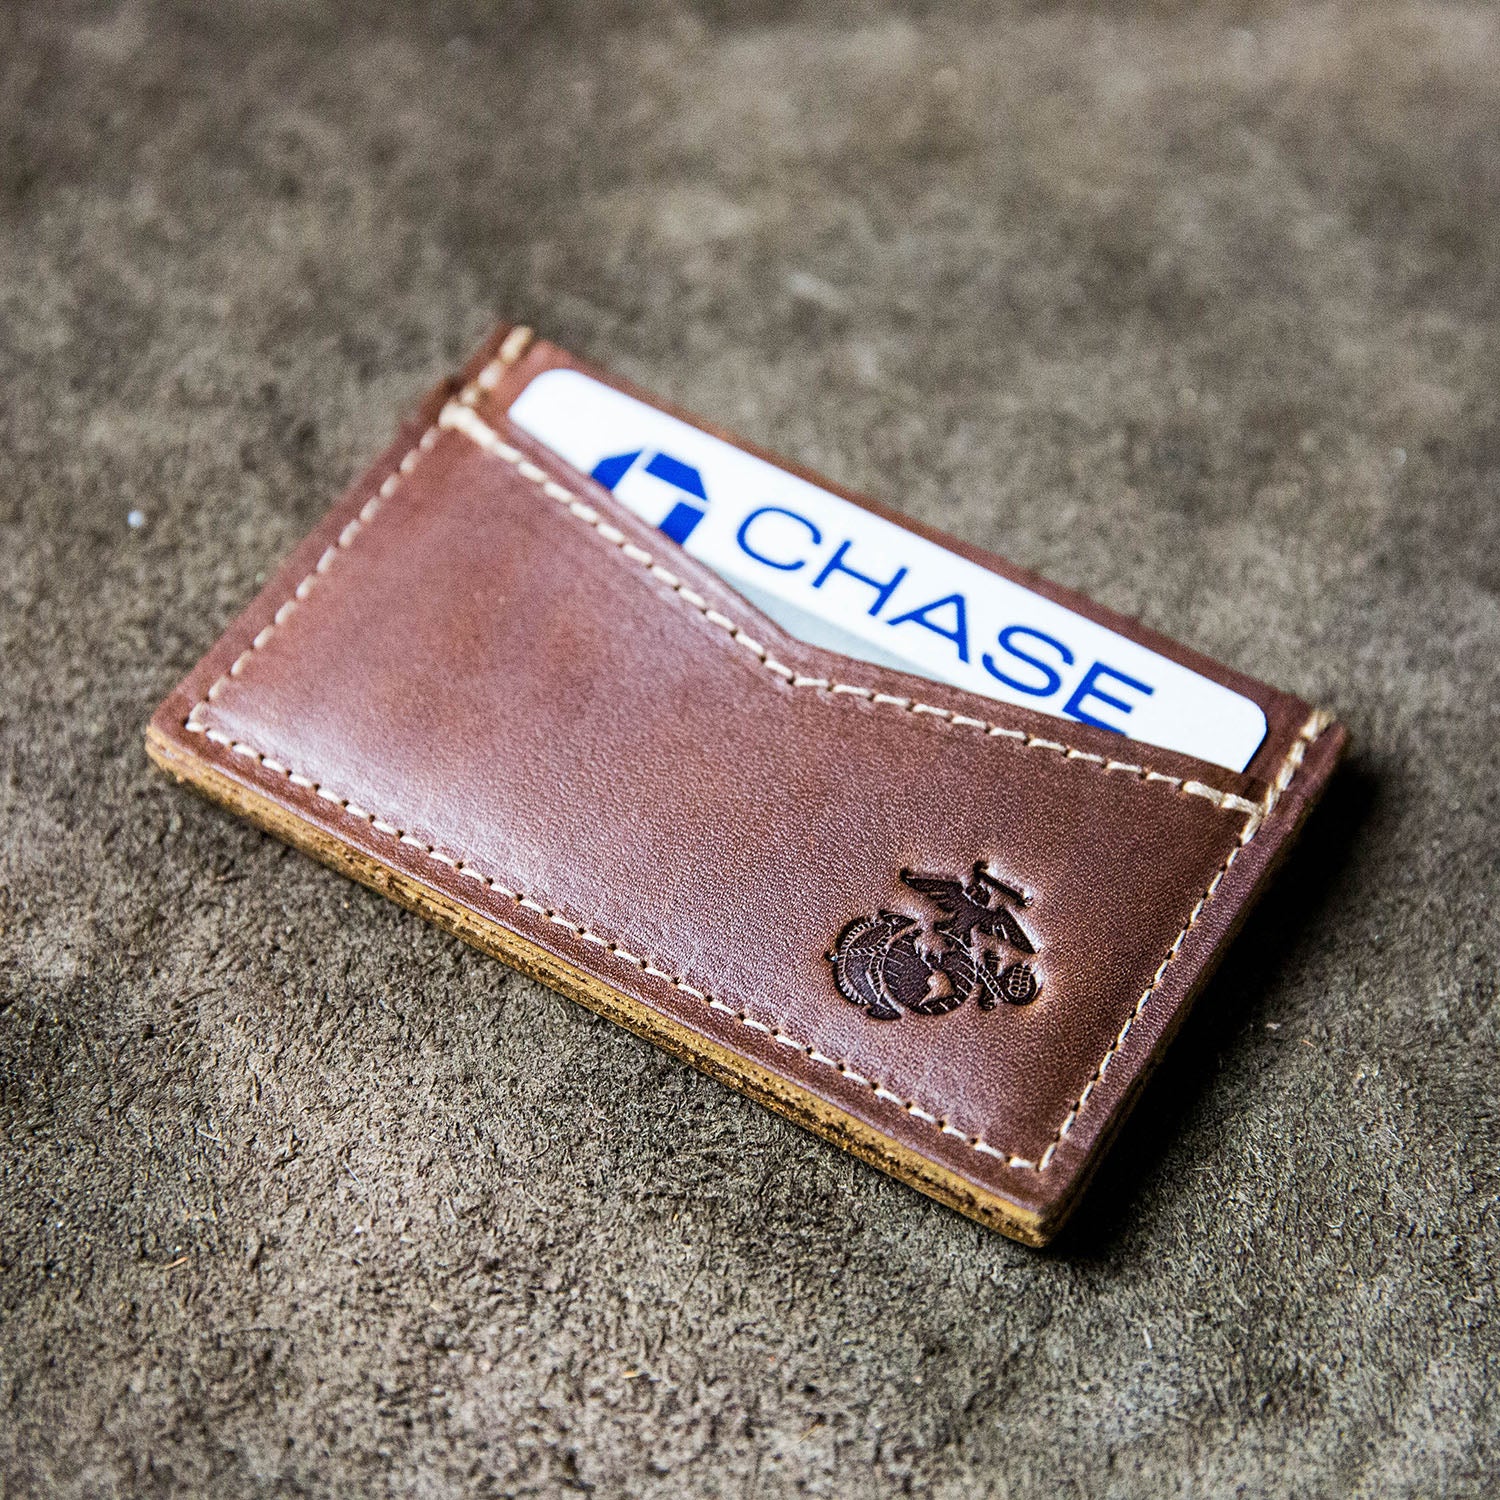 Fine leather front pocket card holder wallet with personalized initials and Marine Corps logo